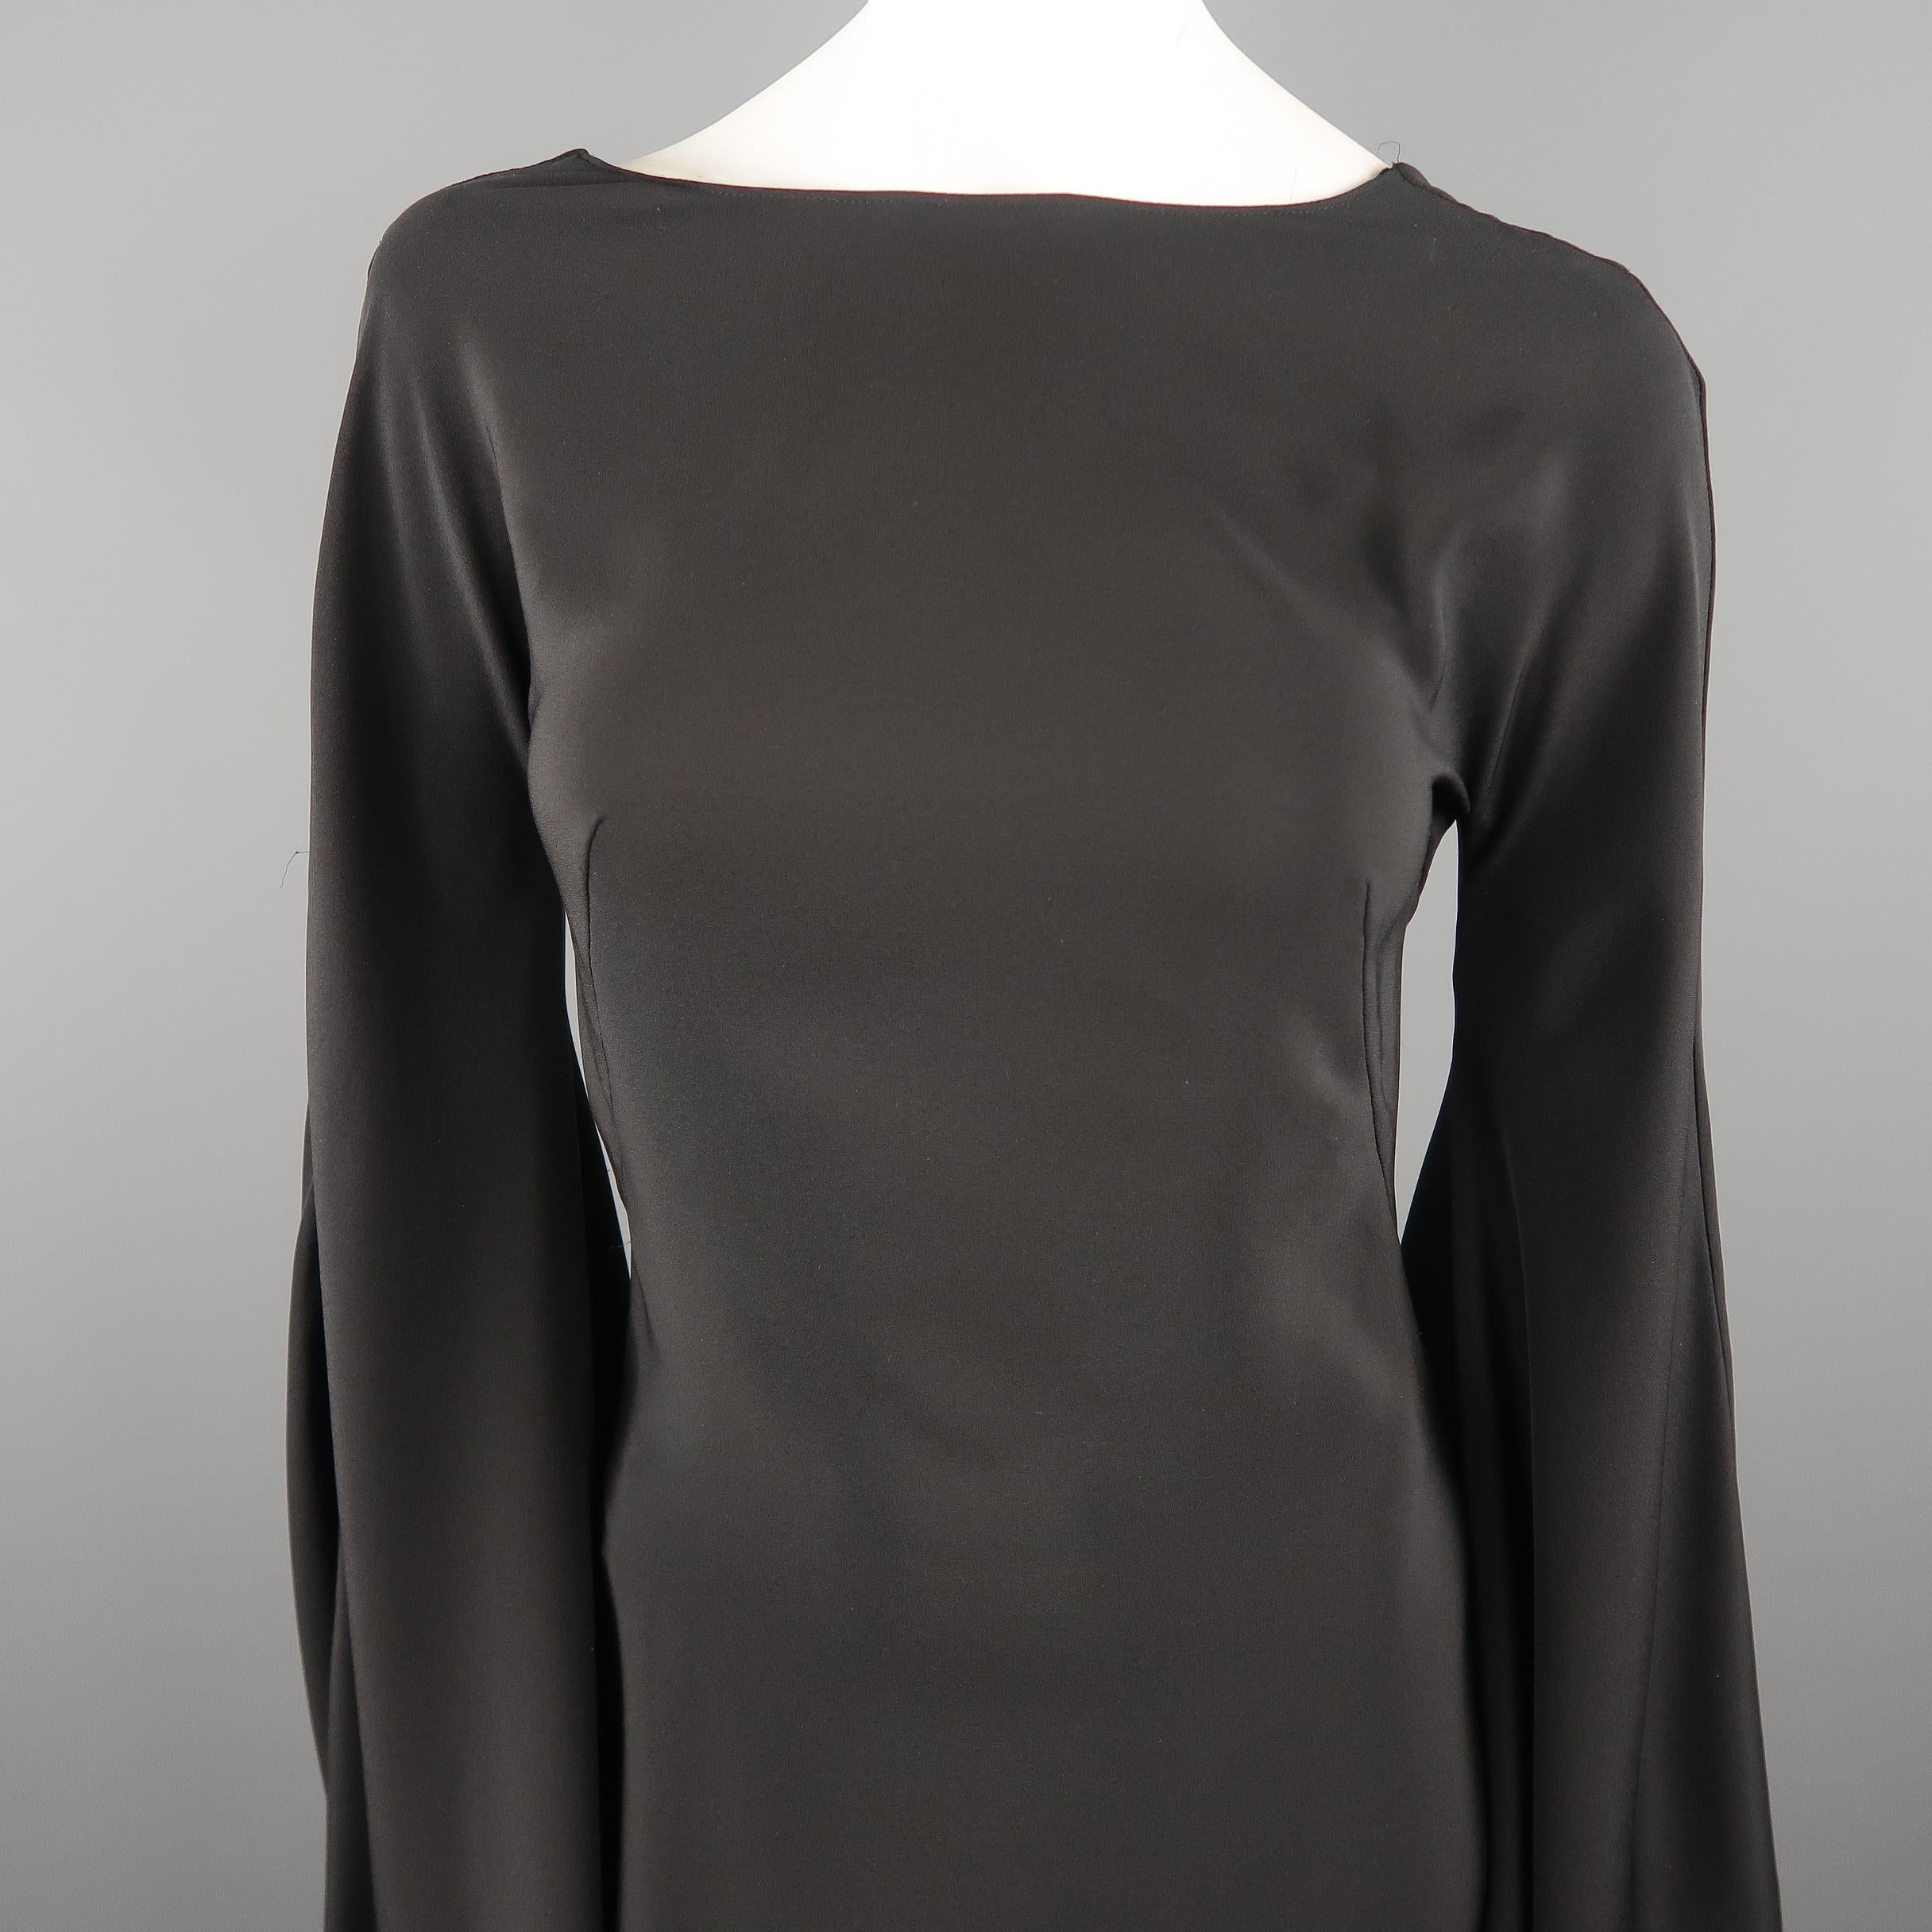 Iconic TOM FORD - Spring 2013 Runway Size 4 Black Silk Open Back Cocktail Dress 2